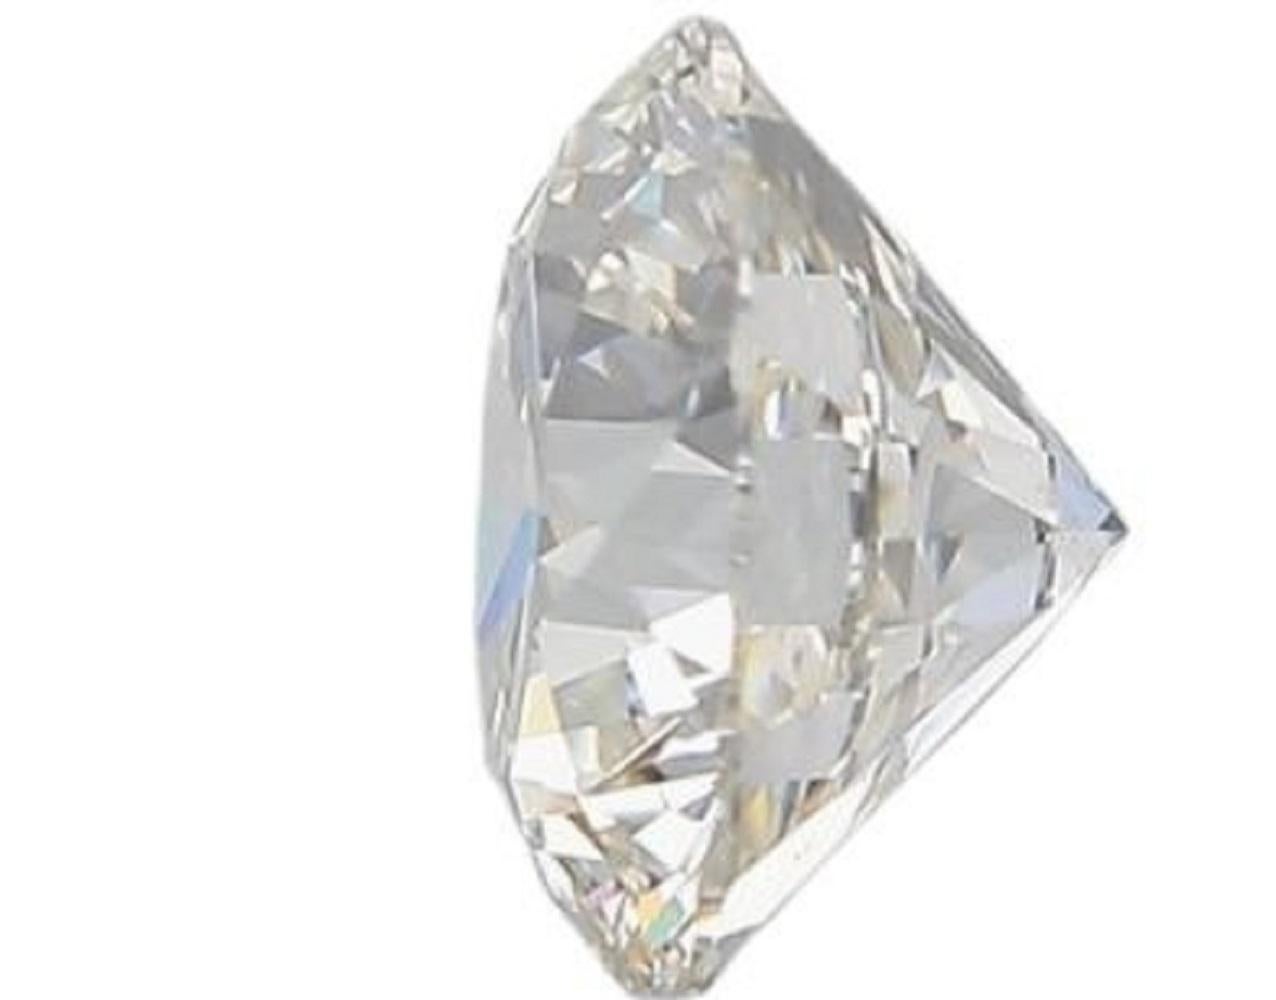 1 sparkling natural round brilliant diamond in a 0.55 carat D IF with excellent cut. This diamond comes with IGI Certificate and laser inscription number.

SKU: E-217
IGI 557255311